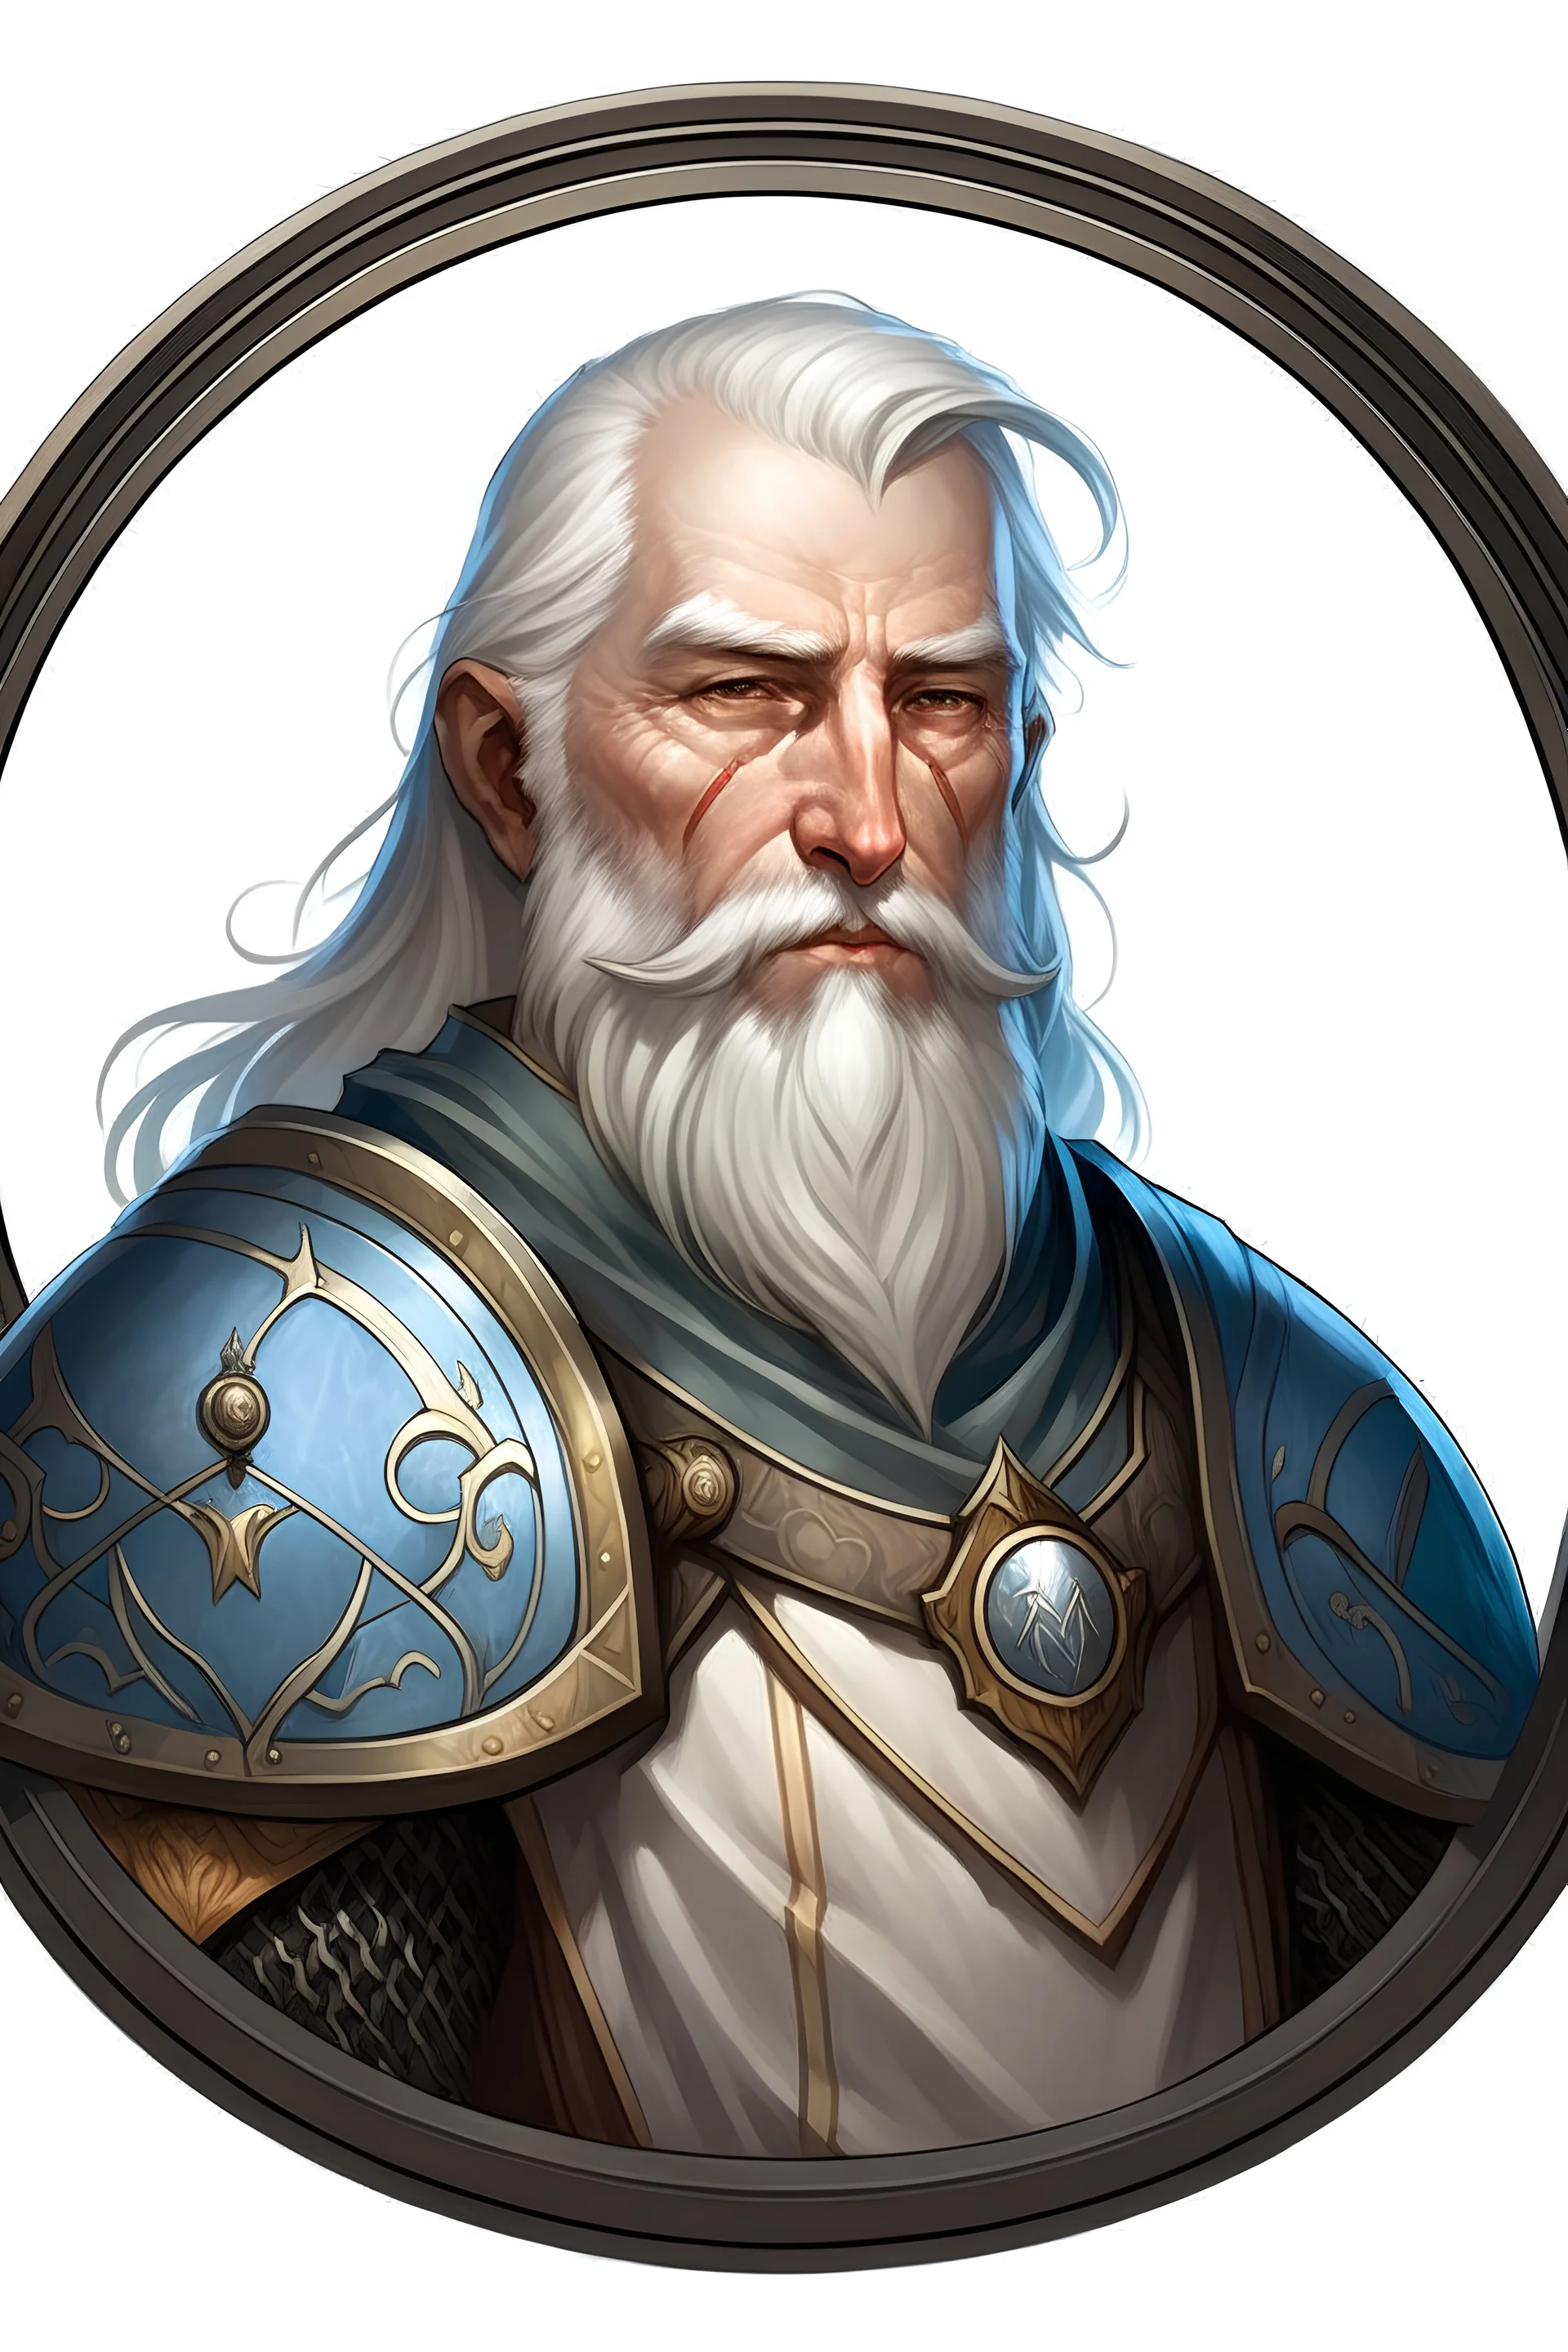 Please create an image for a 30-year old half-aasimar male with silver hair and a silver beard and blue eyes. He is a cleric of Selune, whose symbol should be placed on the cleric's shield, if visible in the image. The cleric should be wearing either medium or heavy armor, and carrying a warhammer or a mace and a shield